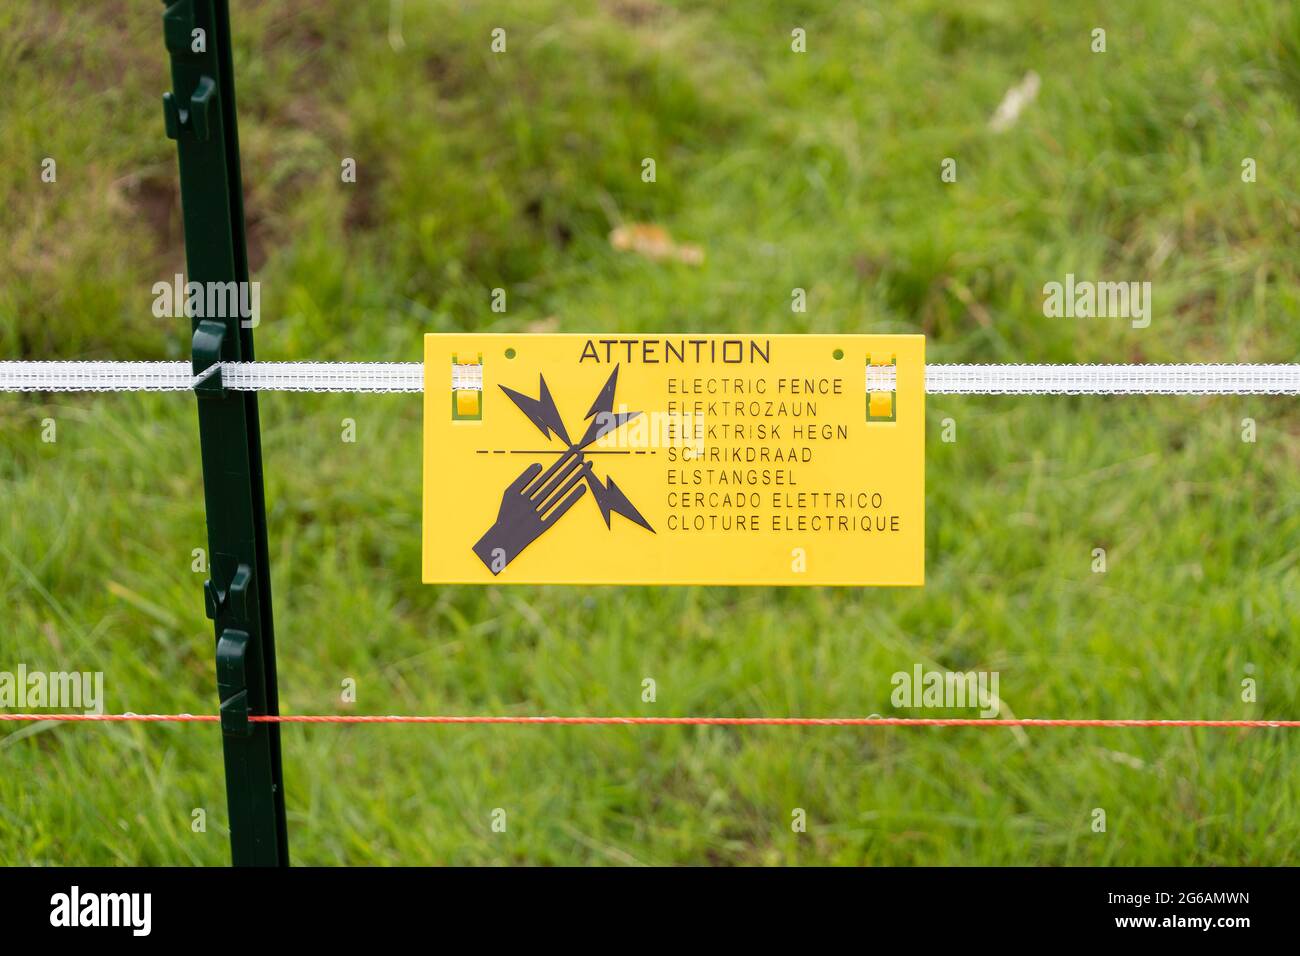 An electric fence warning sign in multiple languages Stock Photo